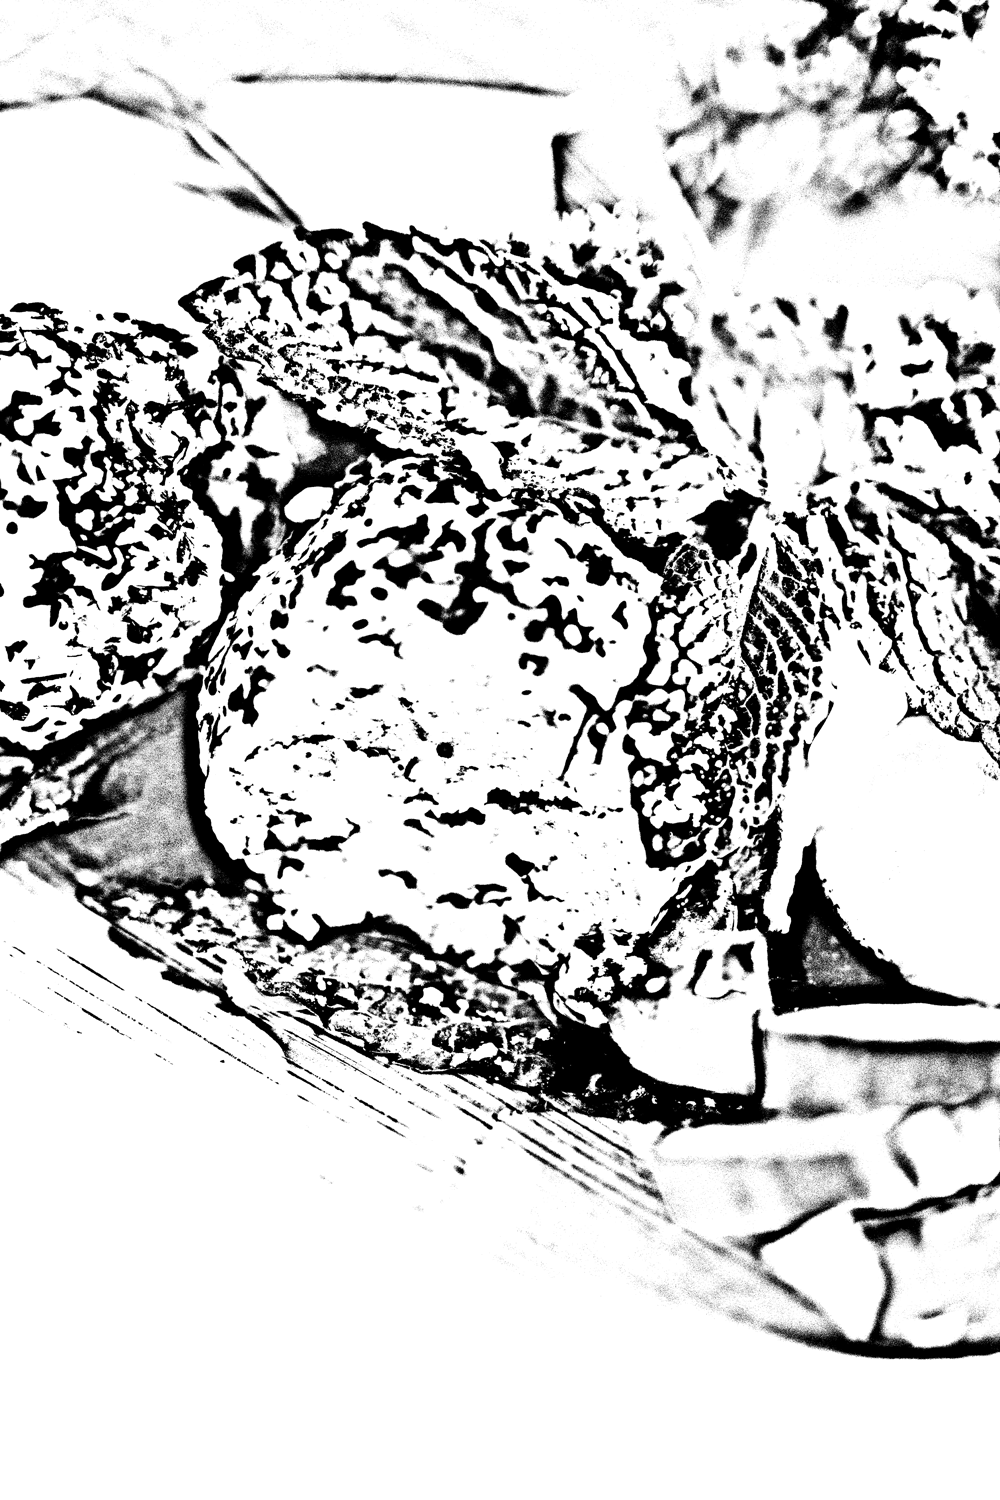 Inverted black and white photograph depicting close-up of food items.